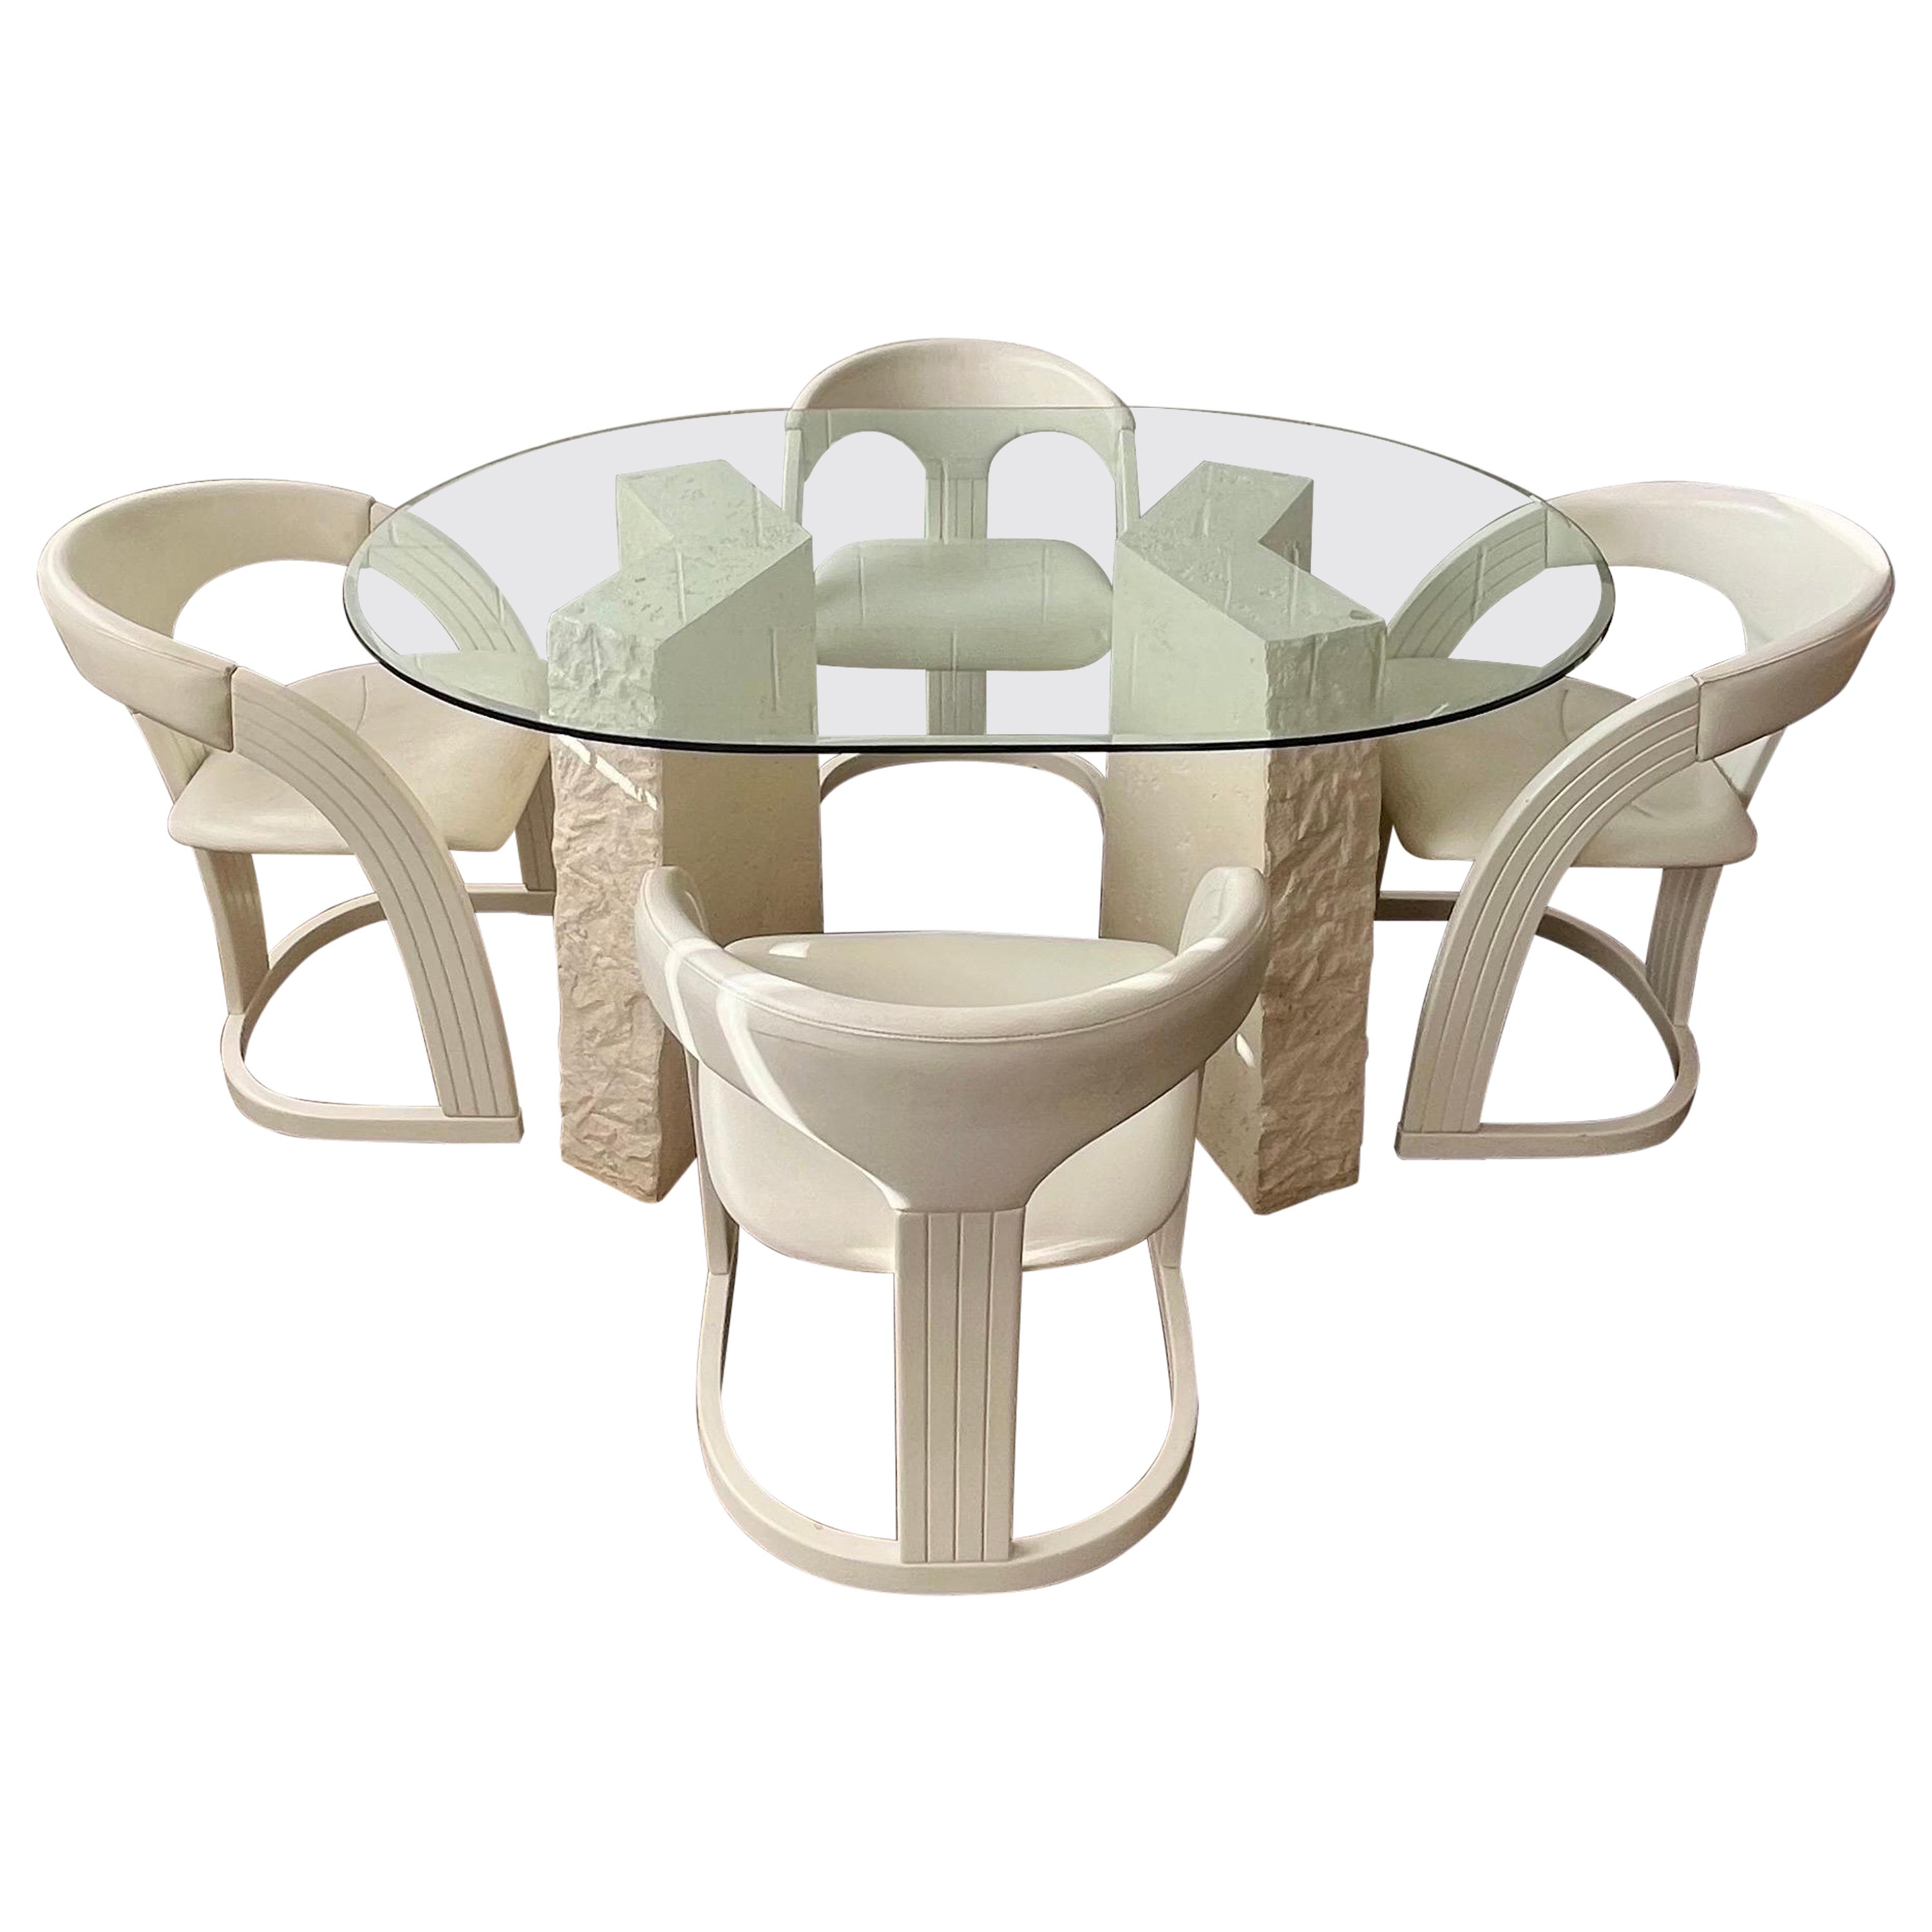 Postmodern Sculptural Plaster and Glass Dining Table and 4 Lacquer Chairs Italy For Sale